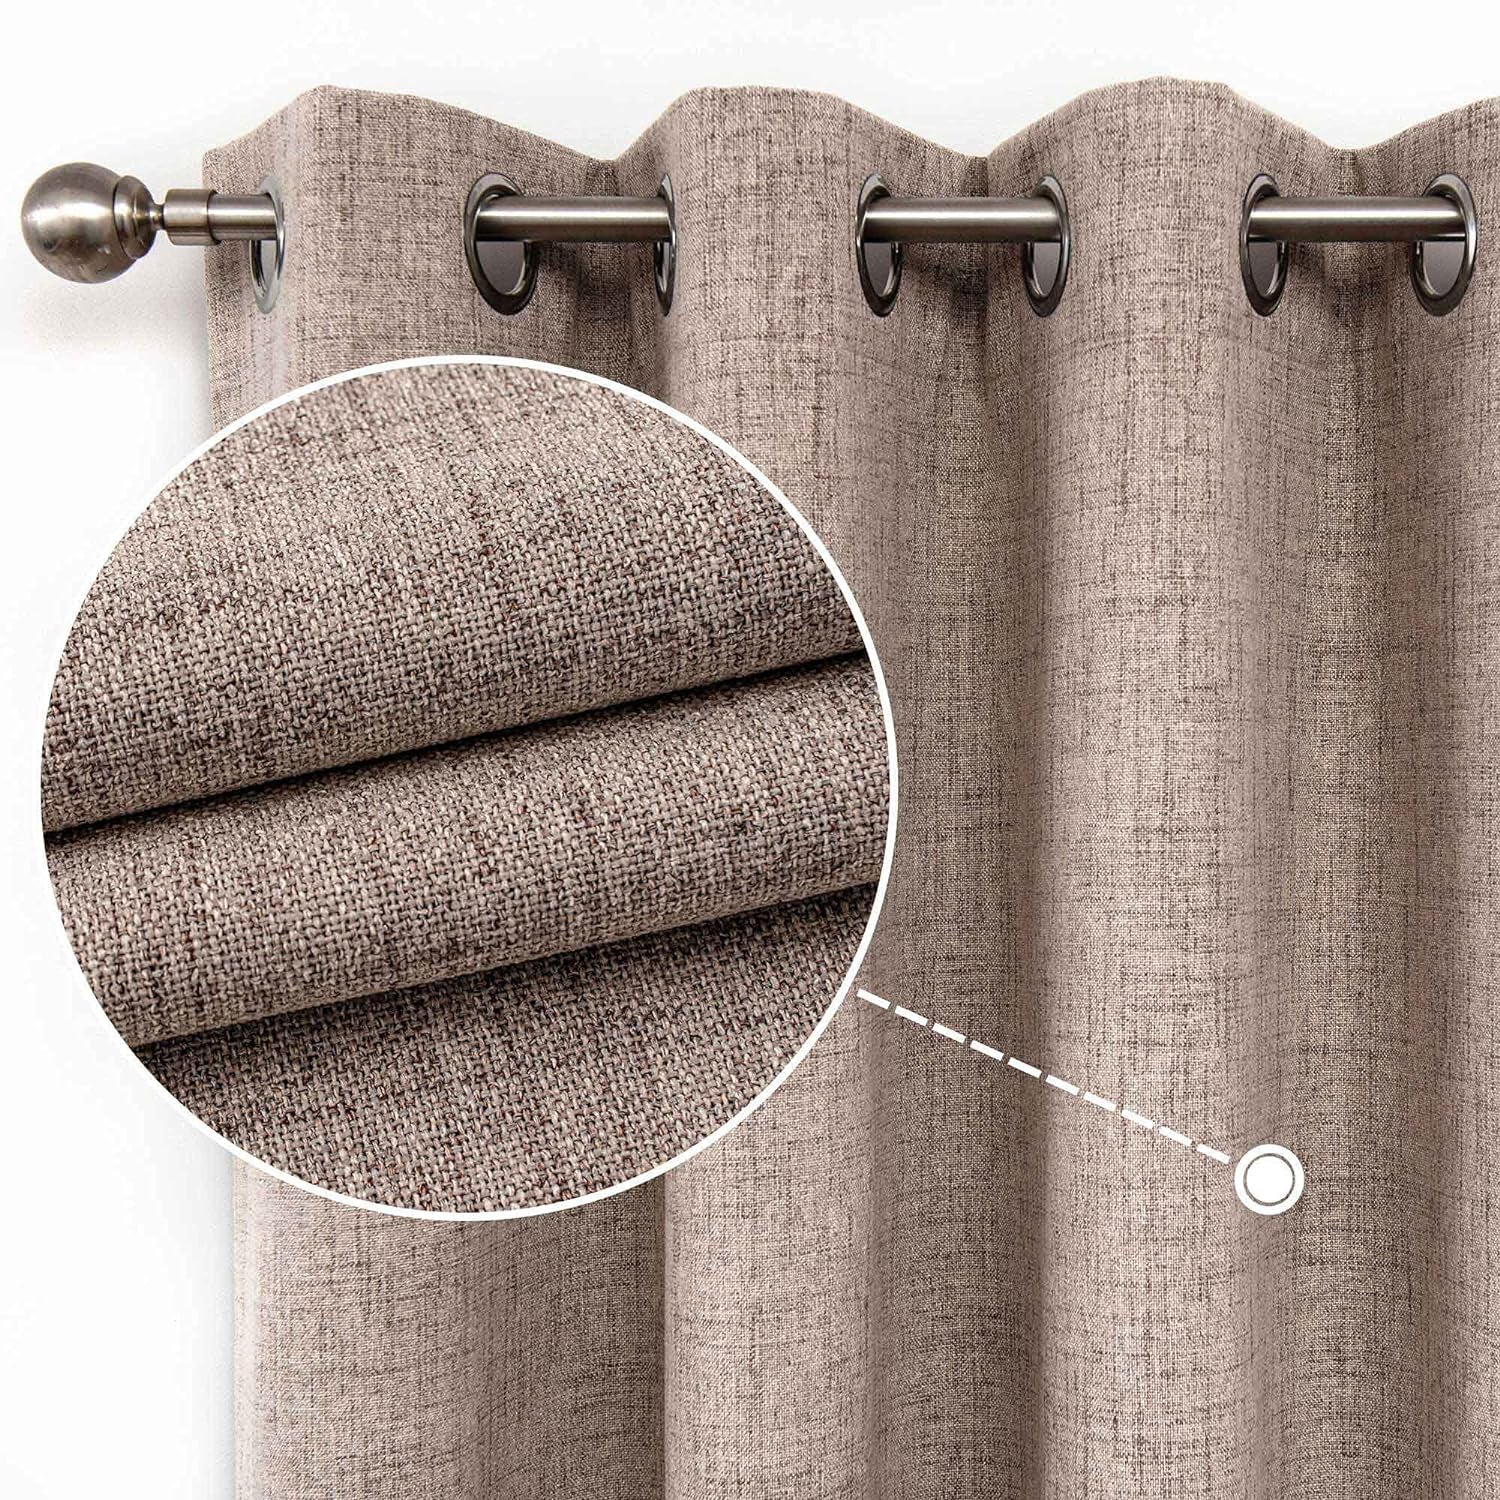 CUCRAF Full Blackout Window Curtains 84 Inches Long,Faux Linen Look Thermal Insulated Grommet Drapes Panels for Bedroom Living Room,Set of 2(52 X 84 Inches, Light Khaki)  CUCRAF   